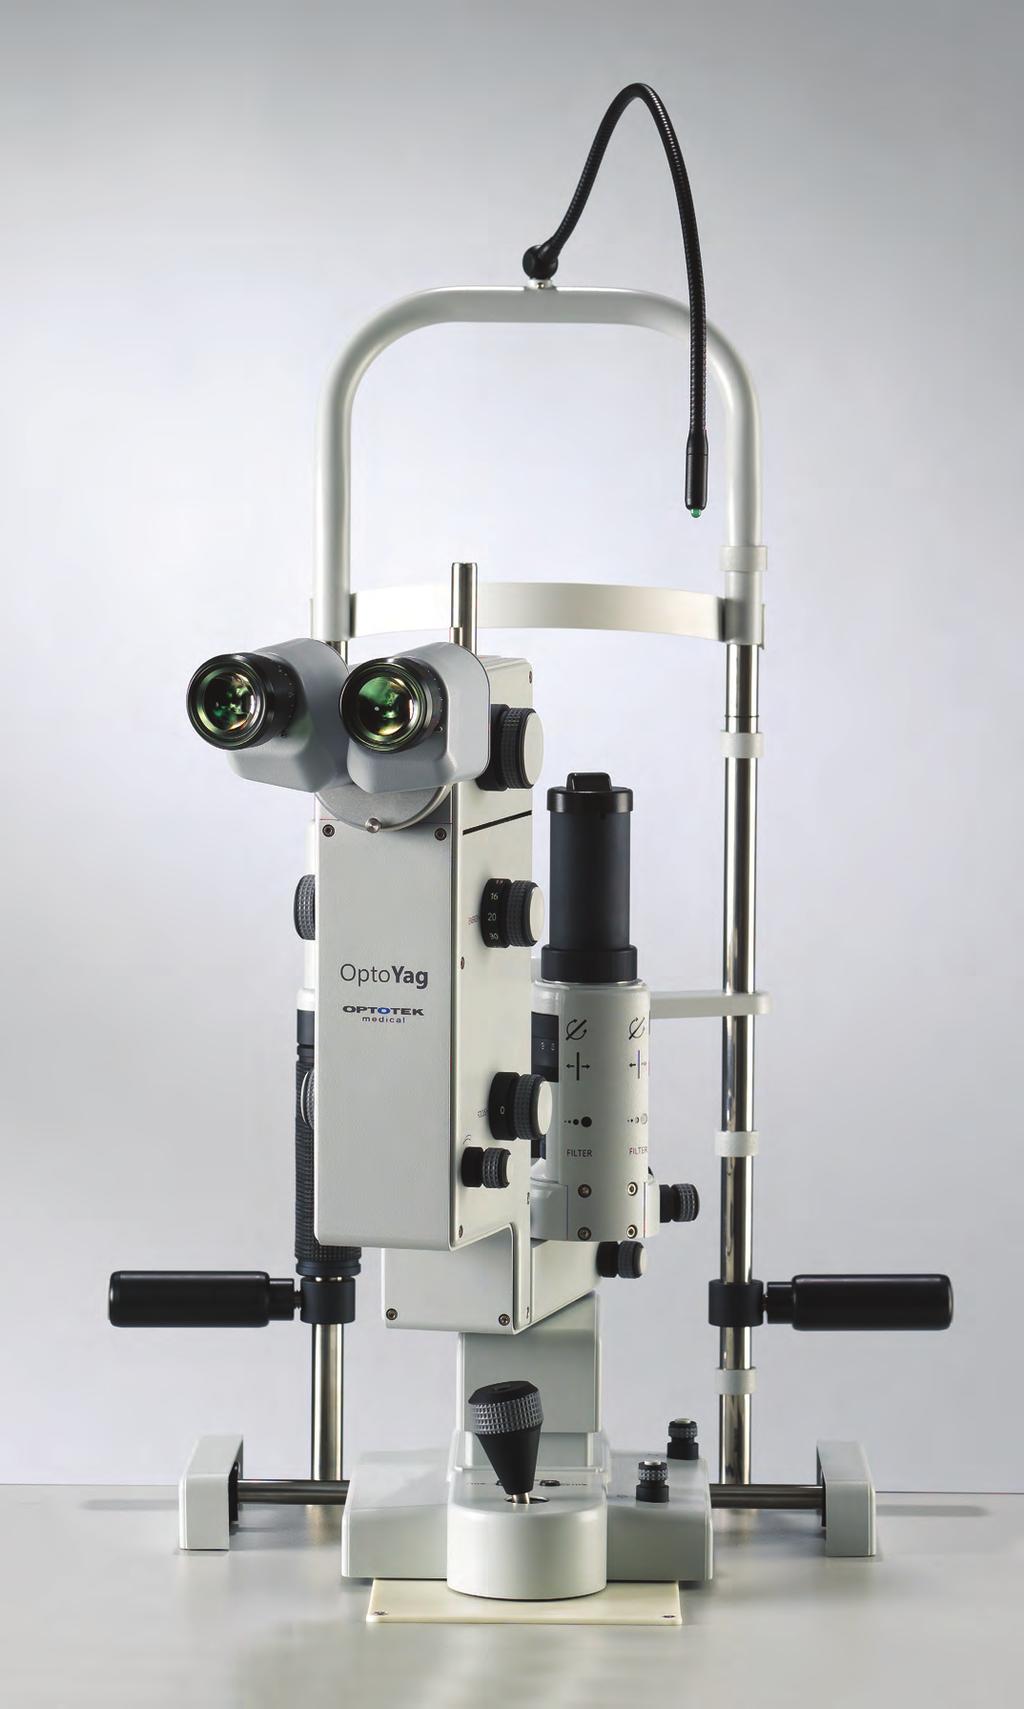 clear vision OptoYag OptoYag utilizes a combination of latest innovations in Nd:YAG laser technology and highly efficient e-slitlight LED slit lamp. Compact design, 30 energy levels in the range of 0.